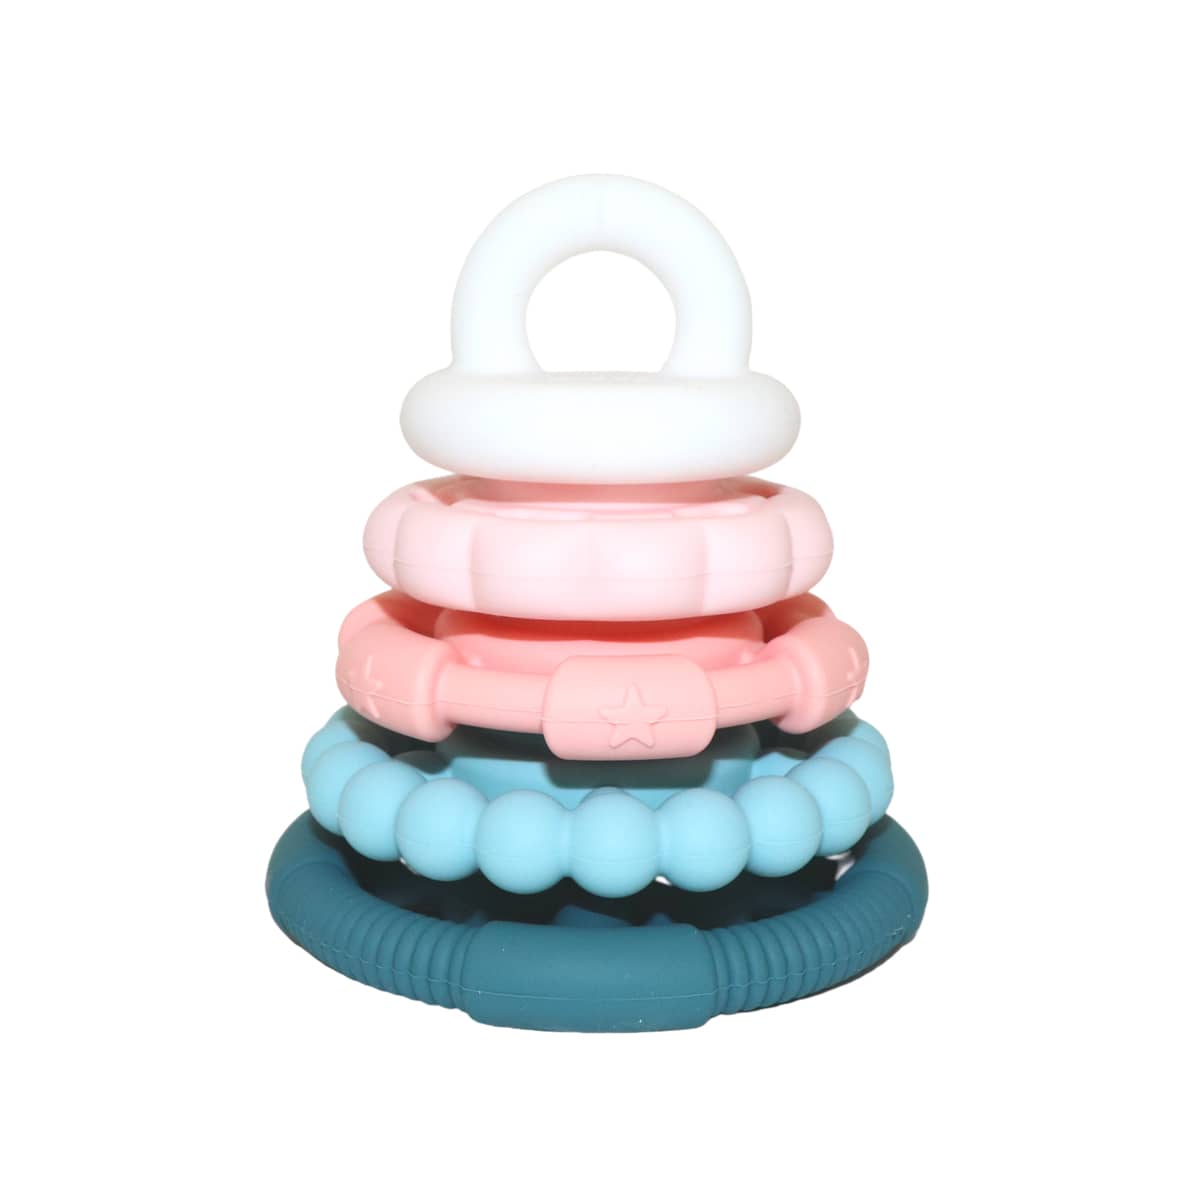 Jellystone Designs Rainbow Stacker Teether and Toy - Sugar Blossom